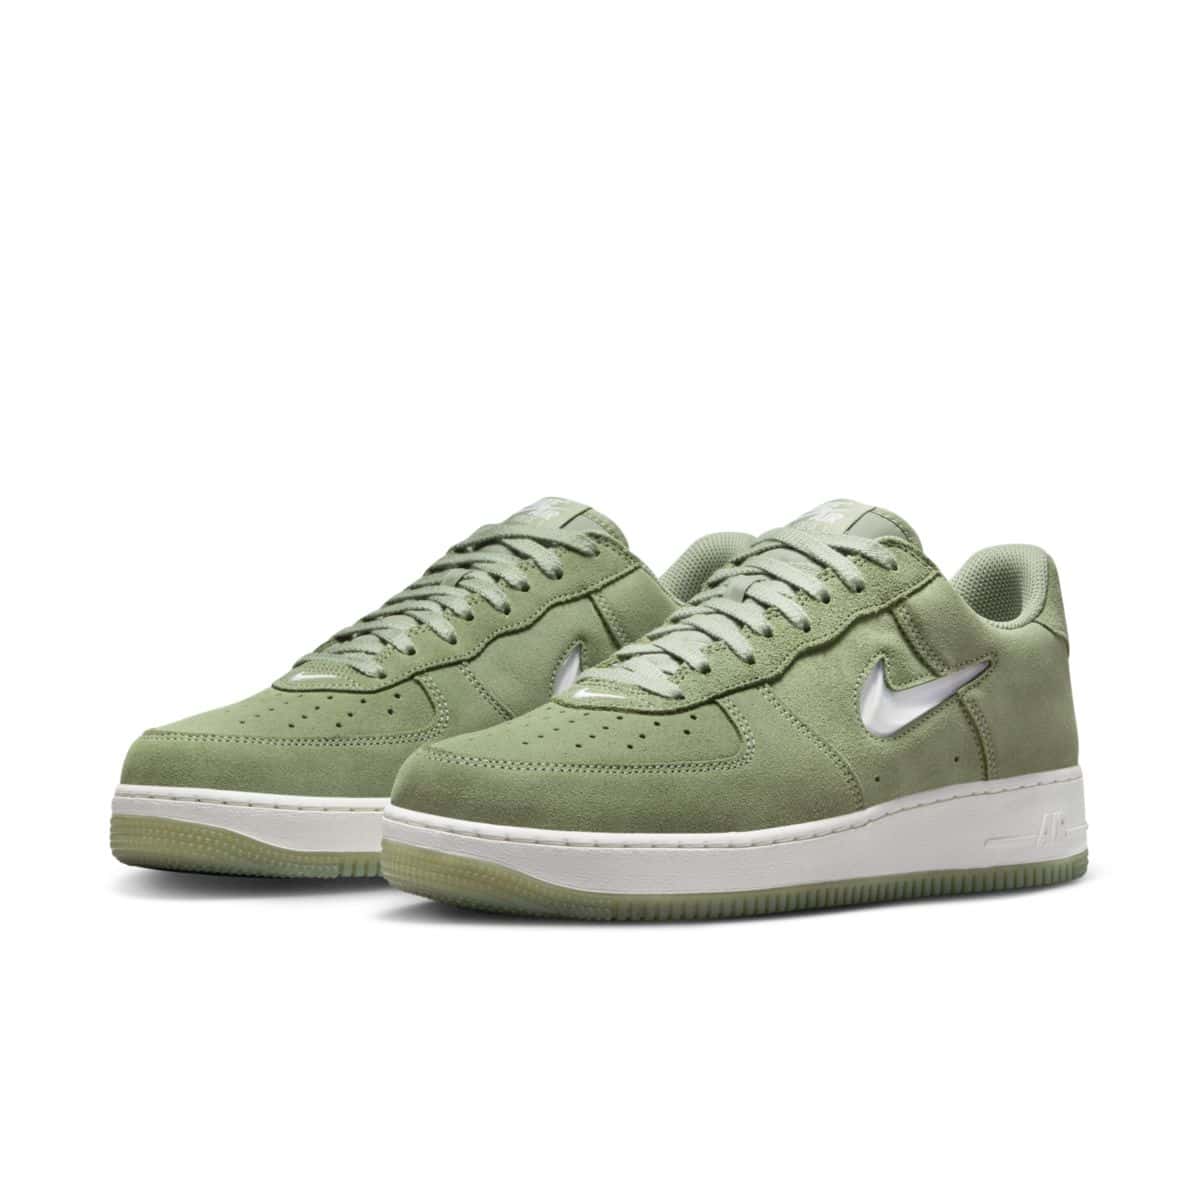 Nike Air Force 1 Low Suede Oil Green Color of the Month DV0785-300 E